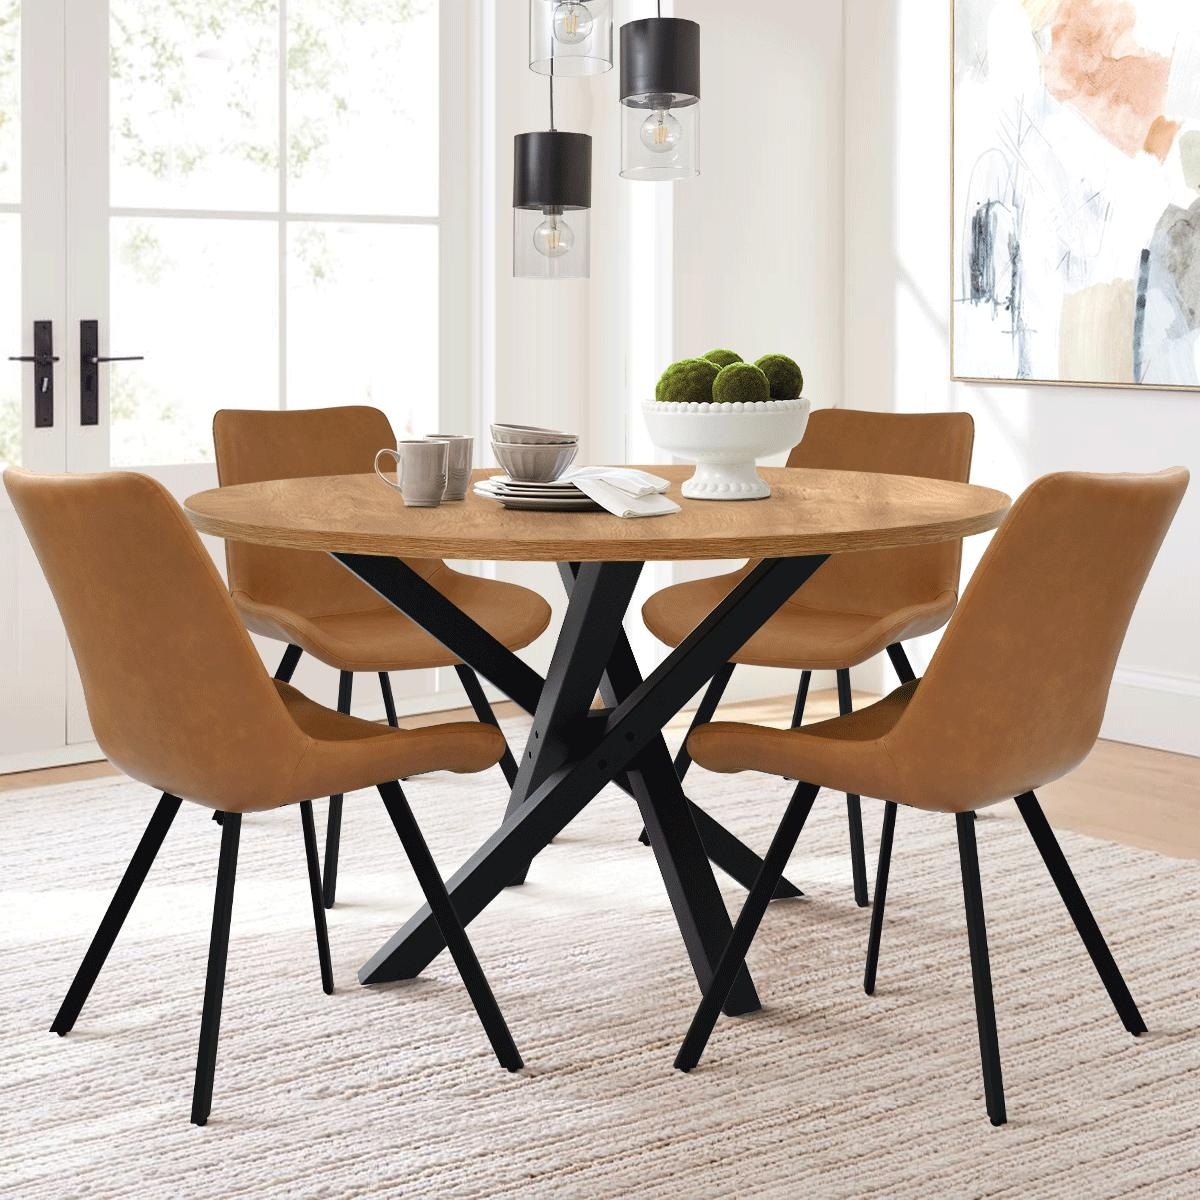 Dining Chairs Set of 4 with Soft Cushion, PU Desk Chair - On Sale